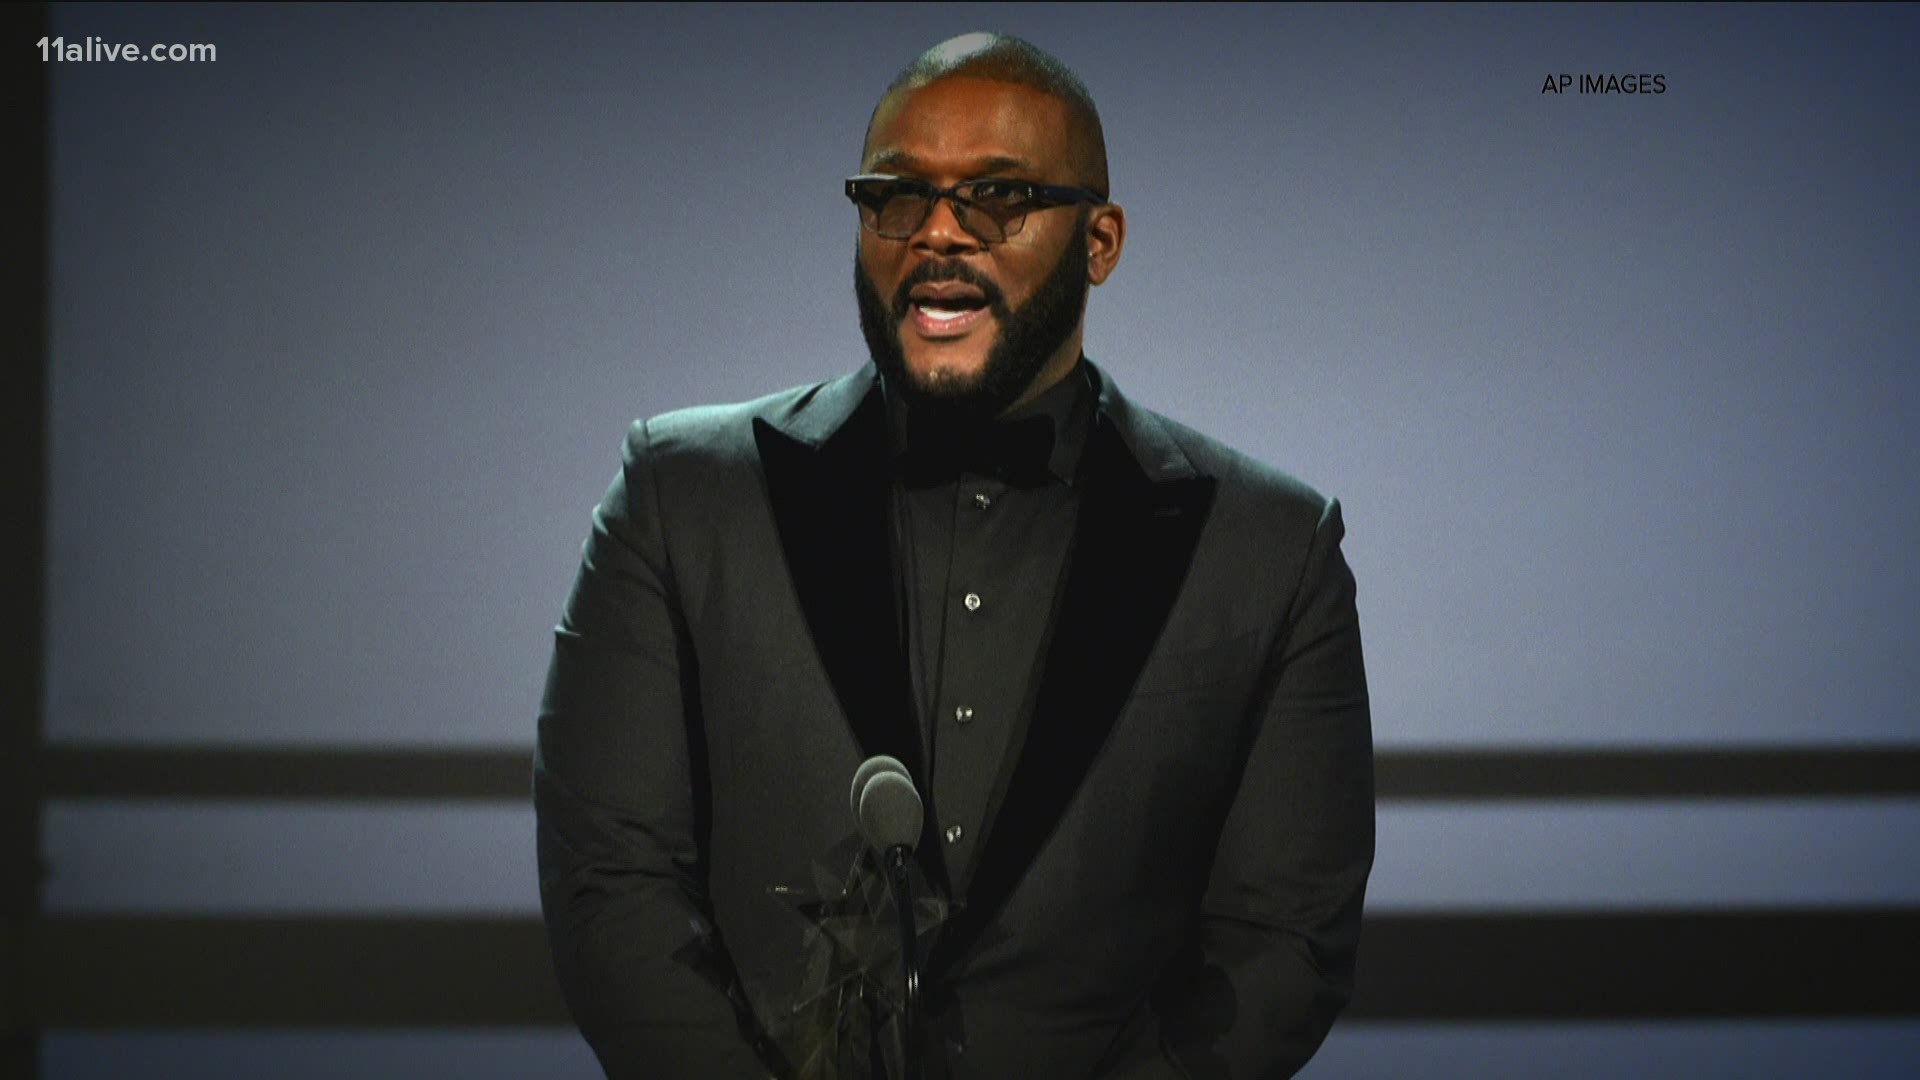 Atlanta movie mogul Tyler Perry is providing food for 5,000 families in need ahead of the holidays. It's being provided at Tyler Perry Studios this Sunday.